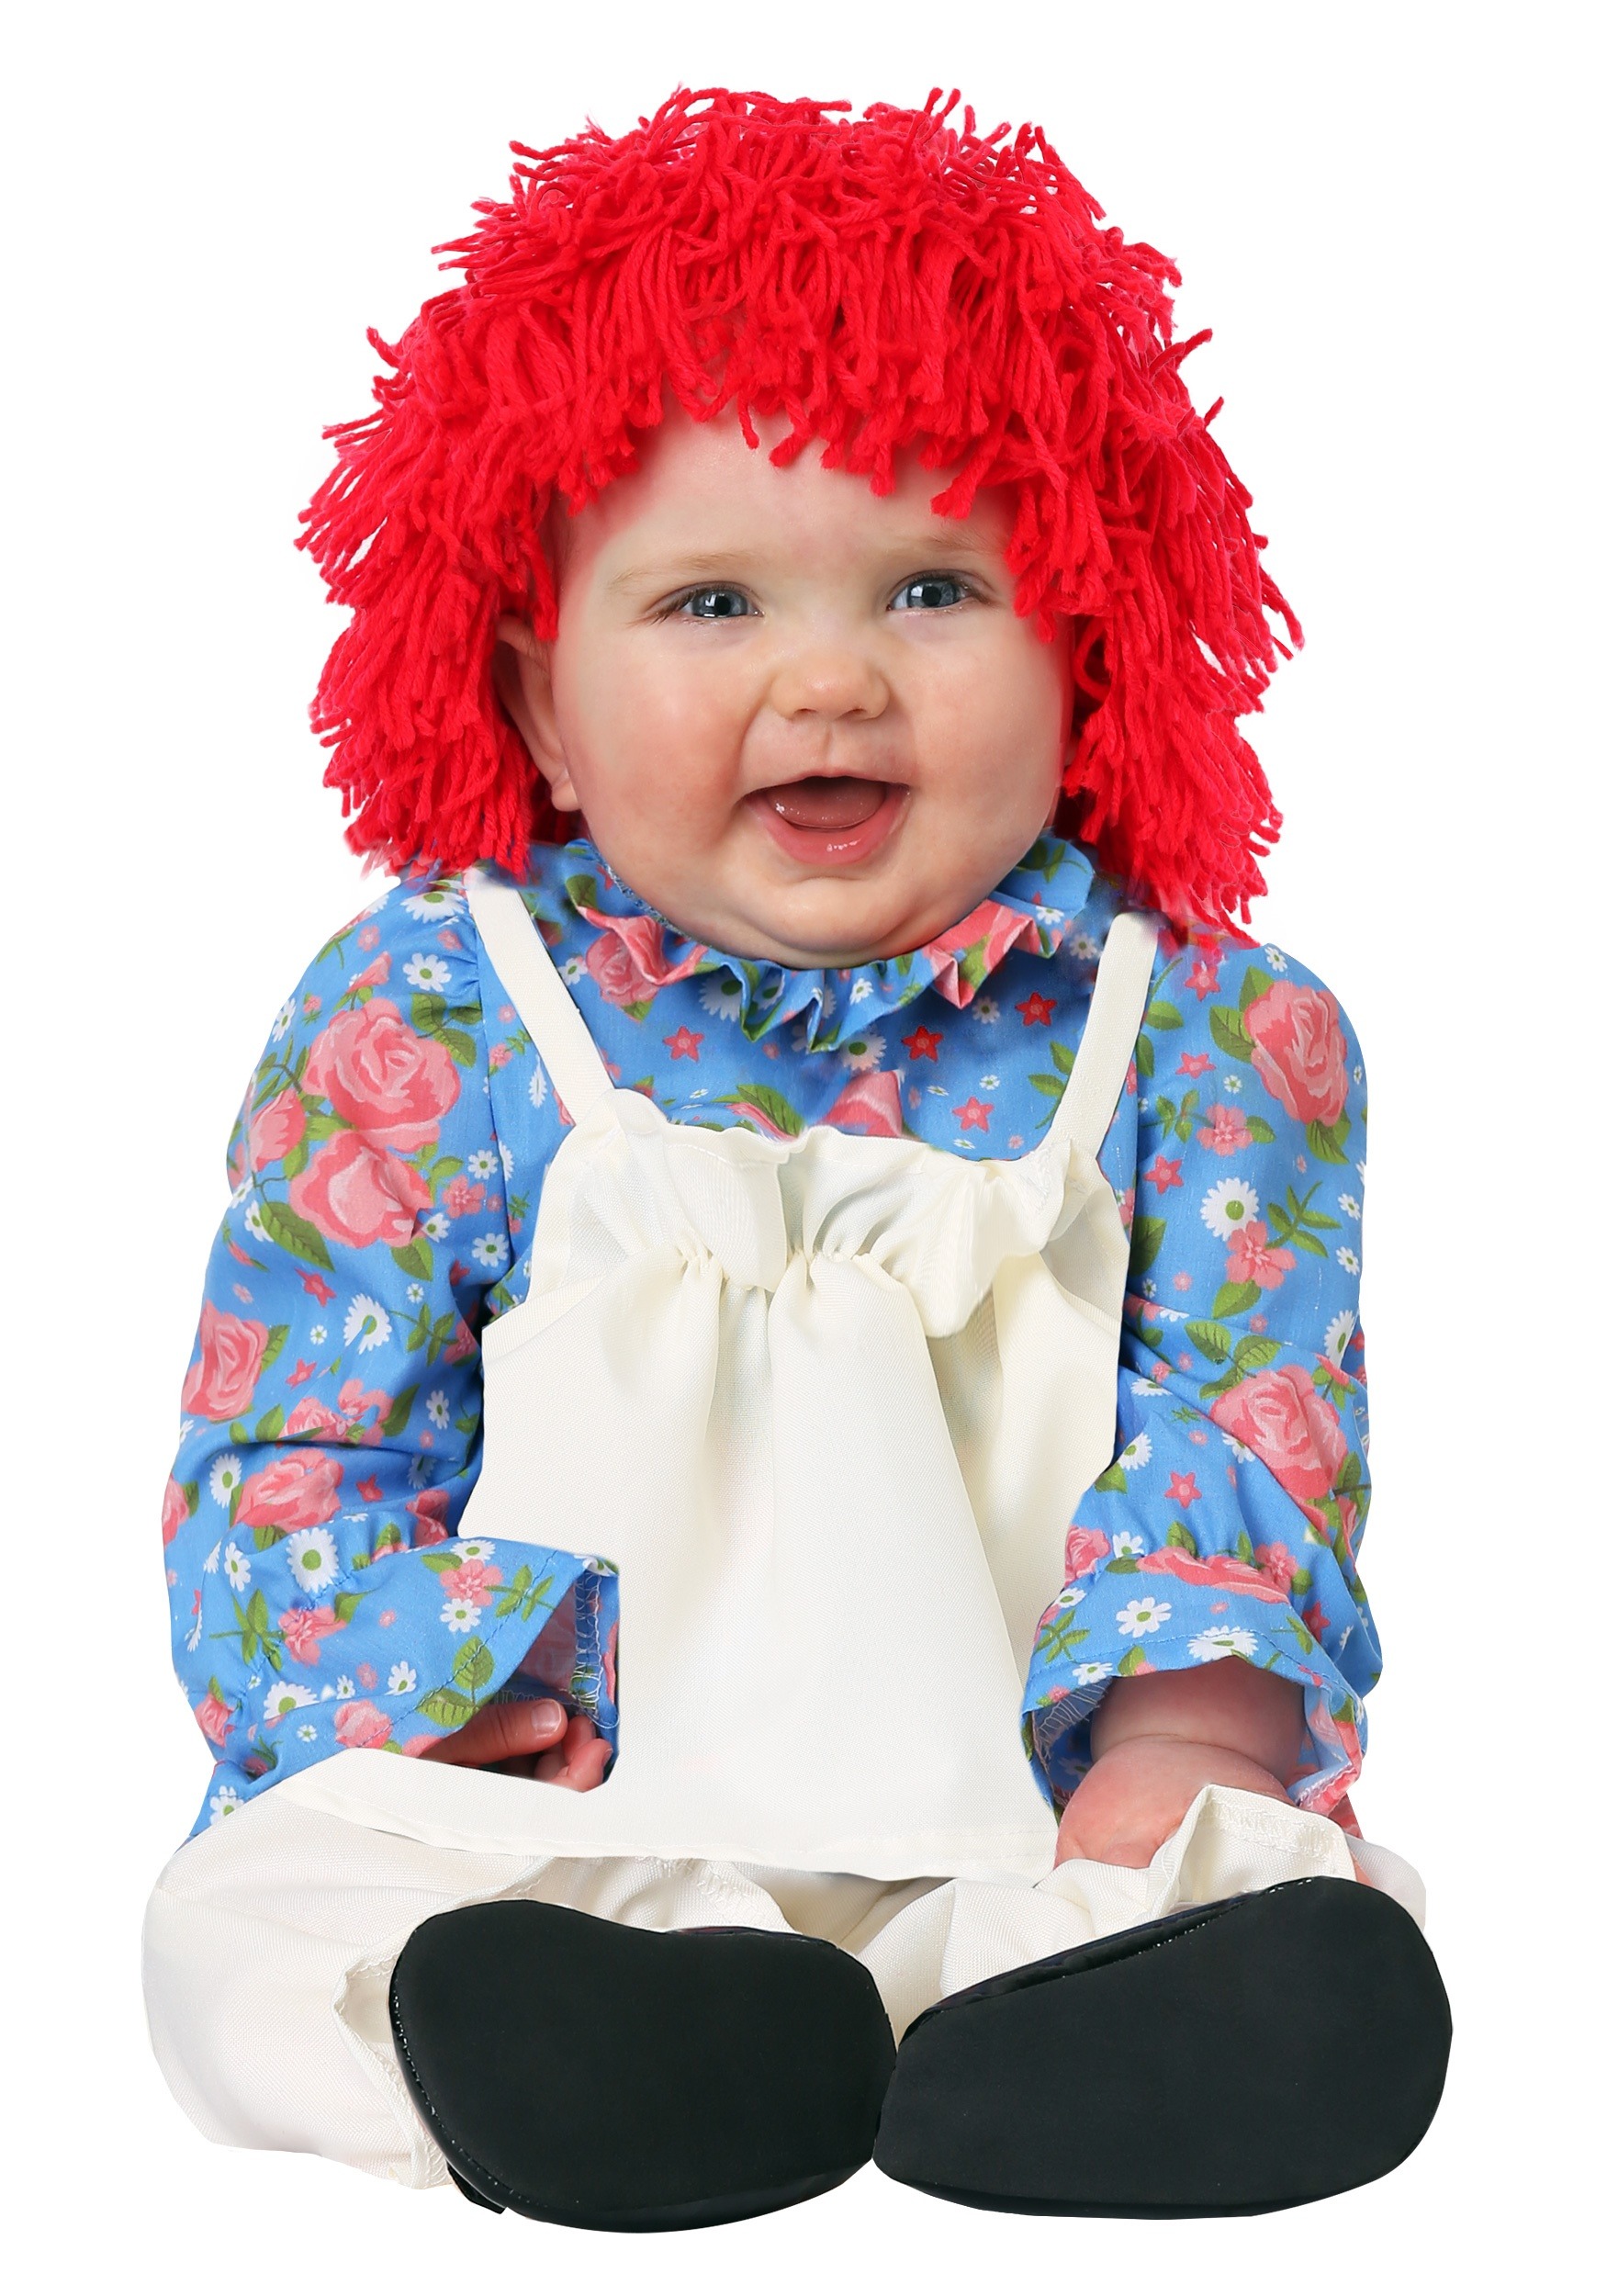 raggedy andy infant costume